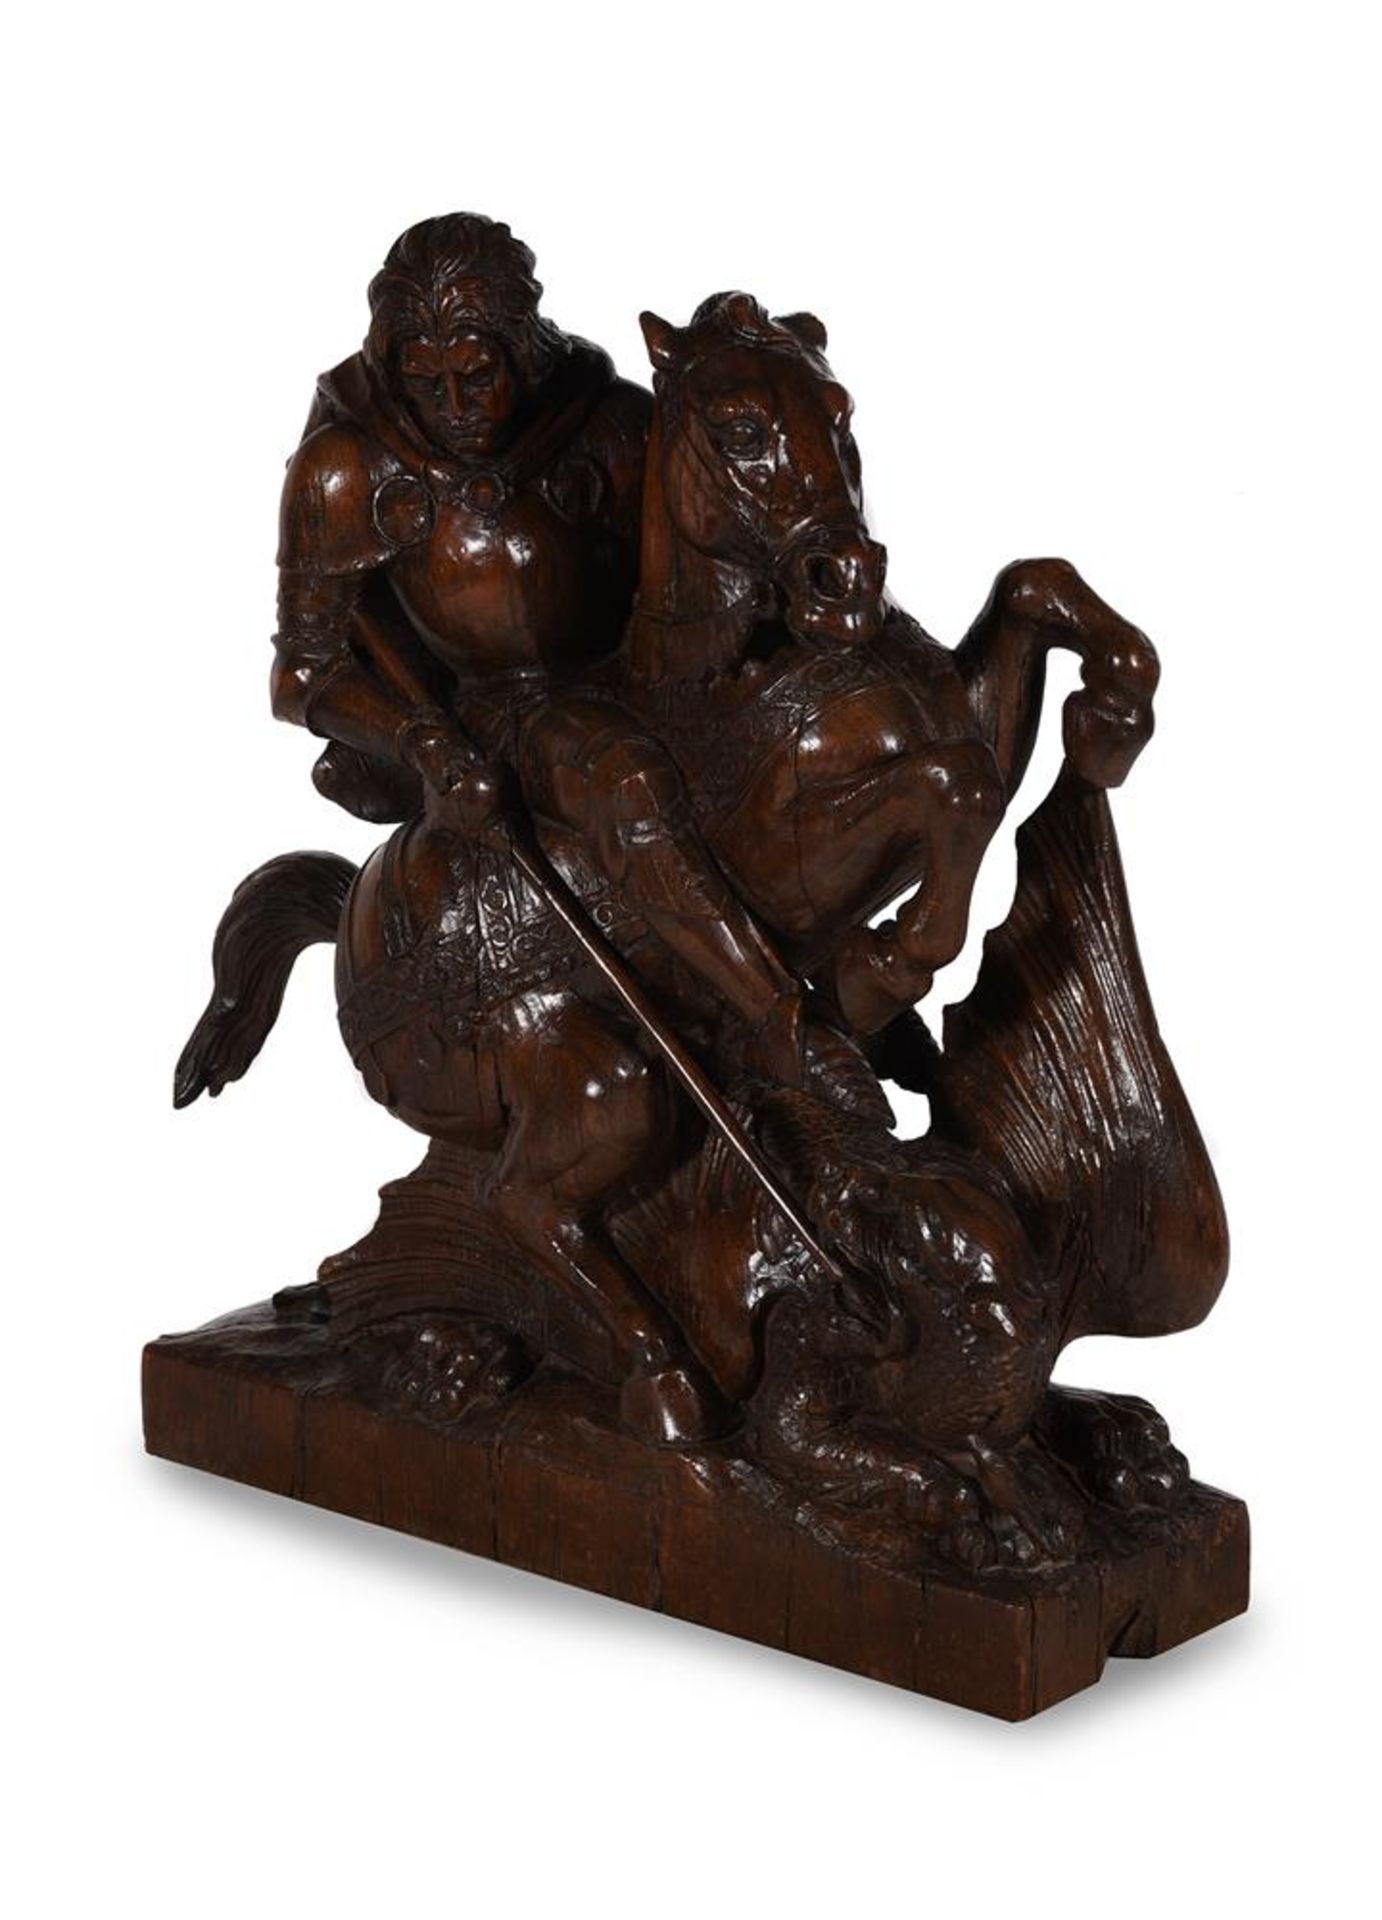 A LARGE CARVED OAK MODEL OF ST. GEORGE AND THE DRAGON, PROBABLY EARLY/MID 19TH CENTURY - Image 2 of 7